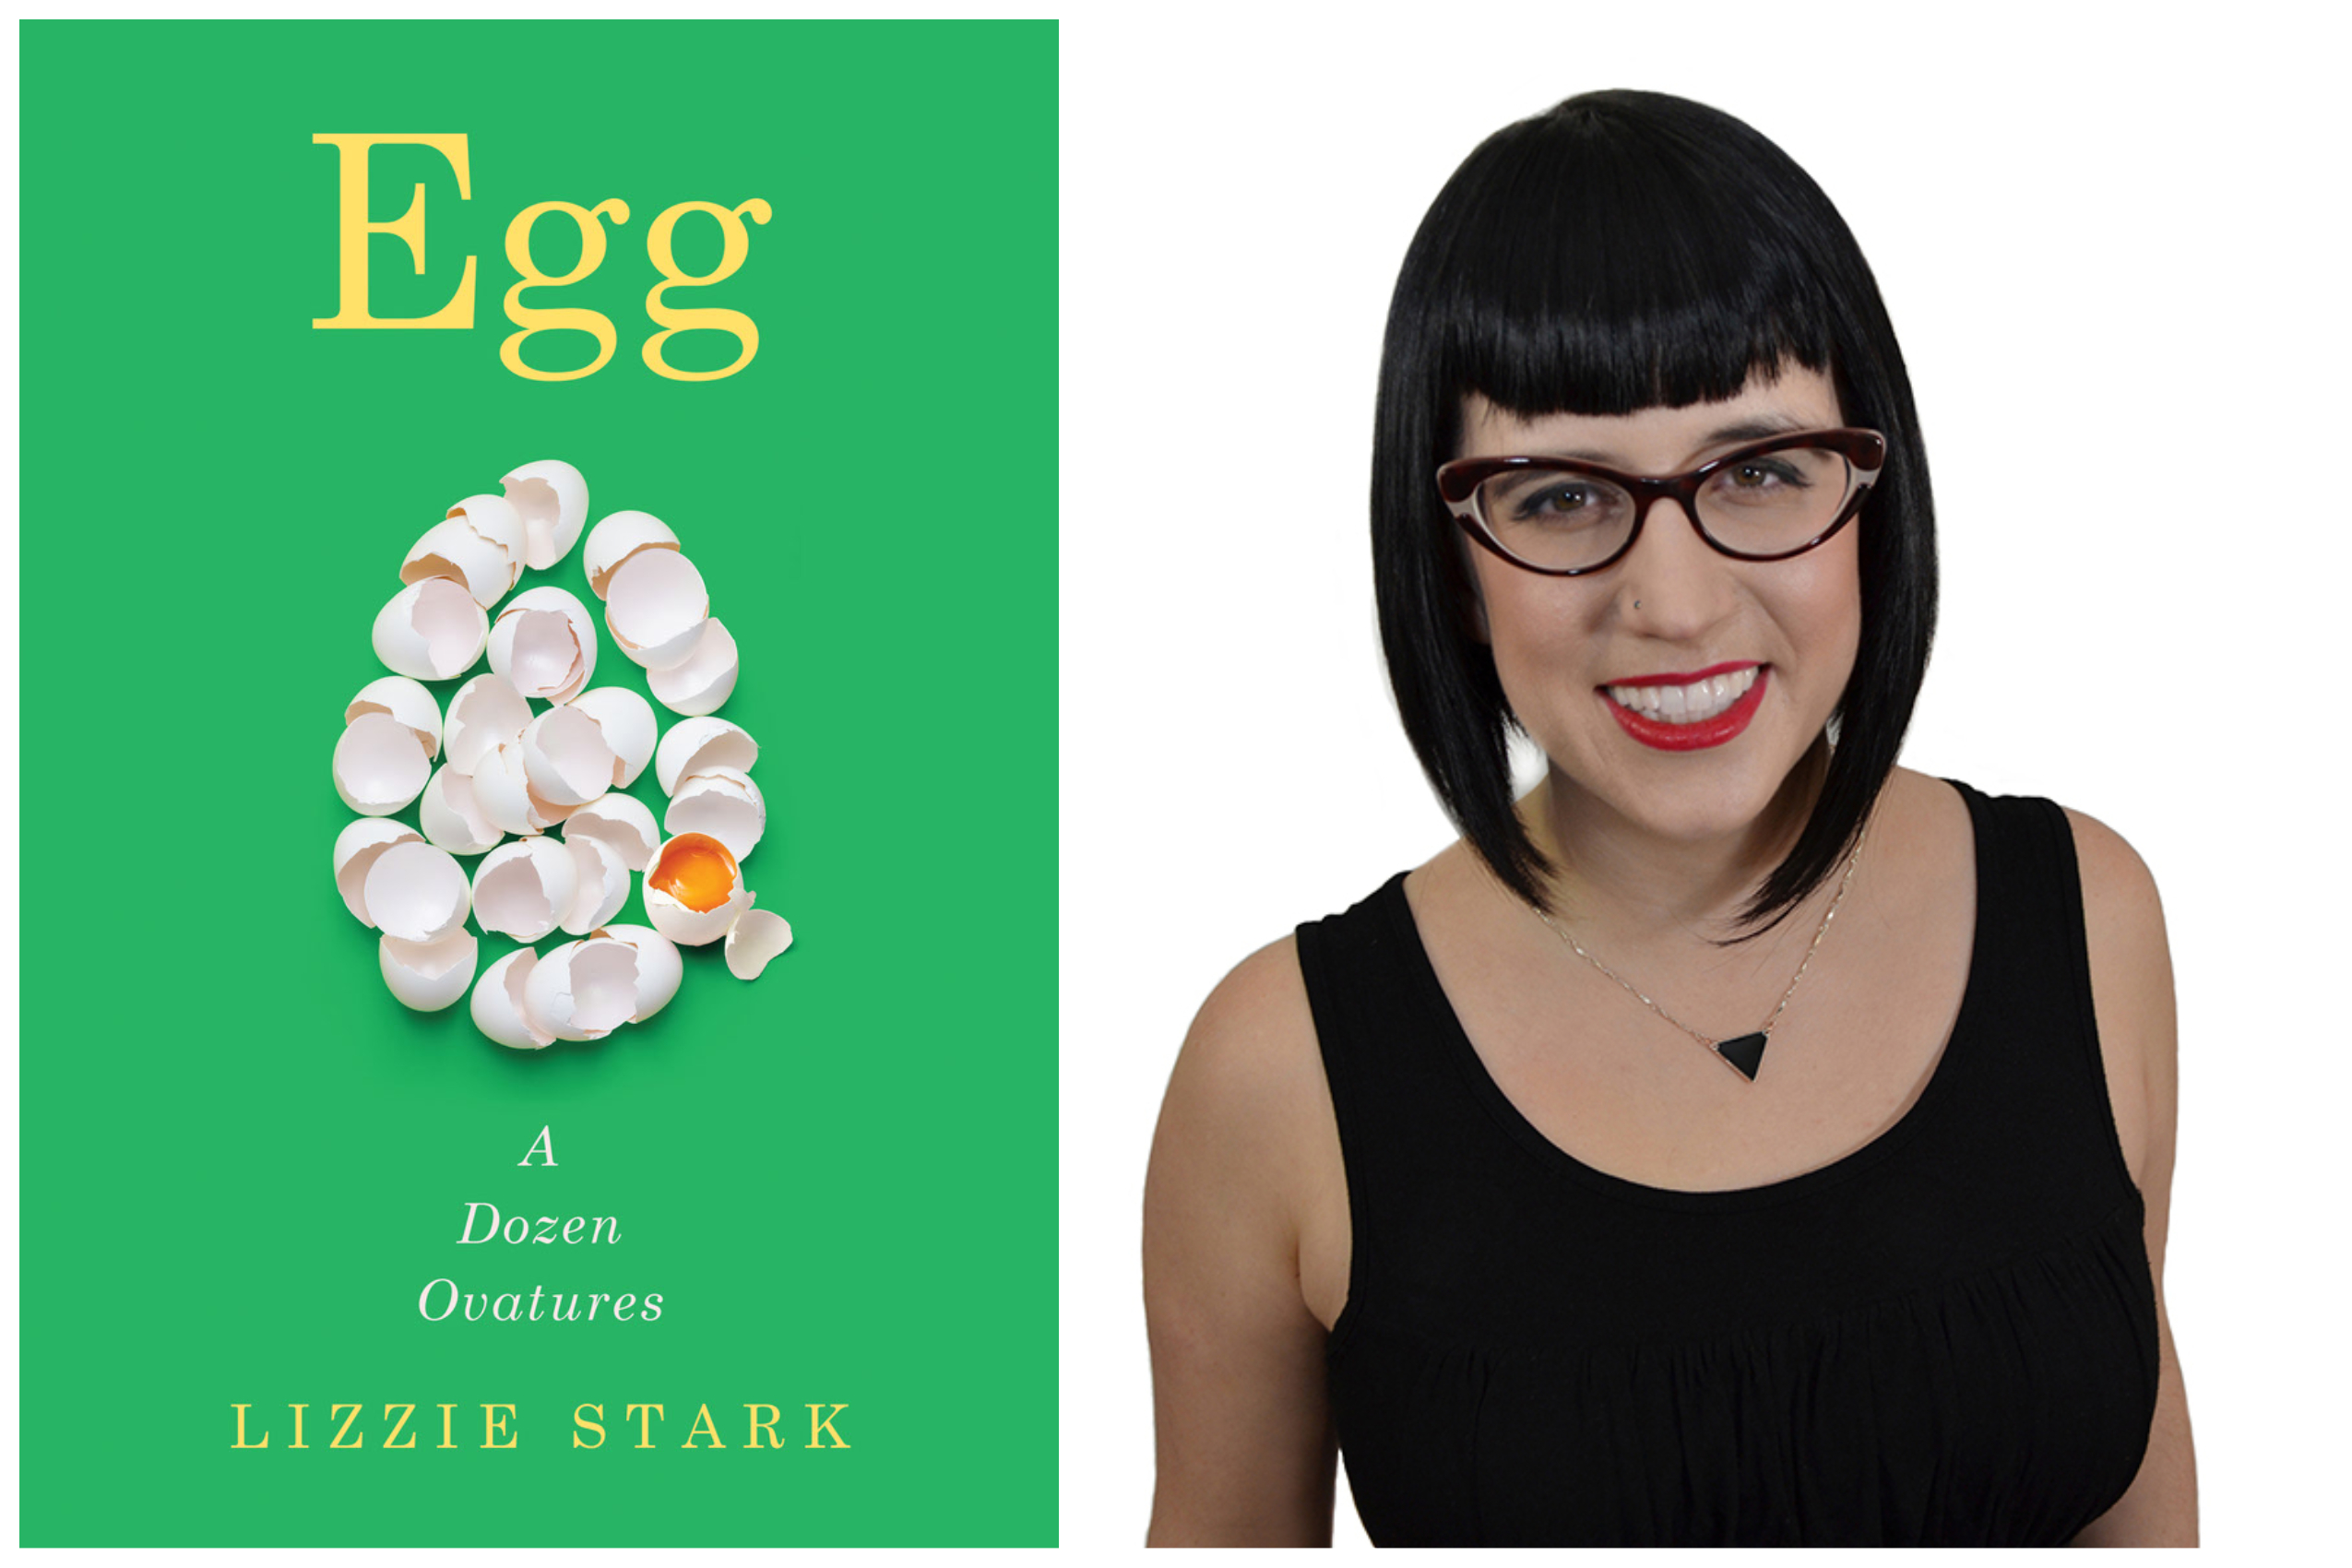 Lizzie Stark is the author of &quot;Egg: A Dozen Ovatures.&quot; (Courtesy the publishers; photo by J.R. Blackwell)